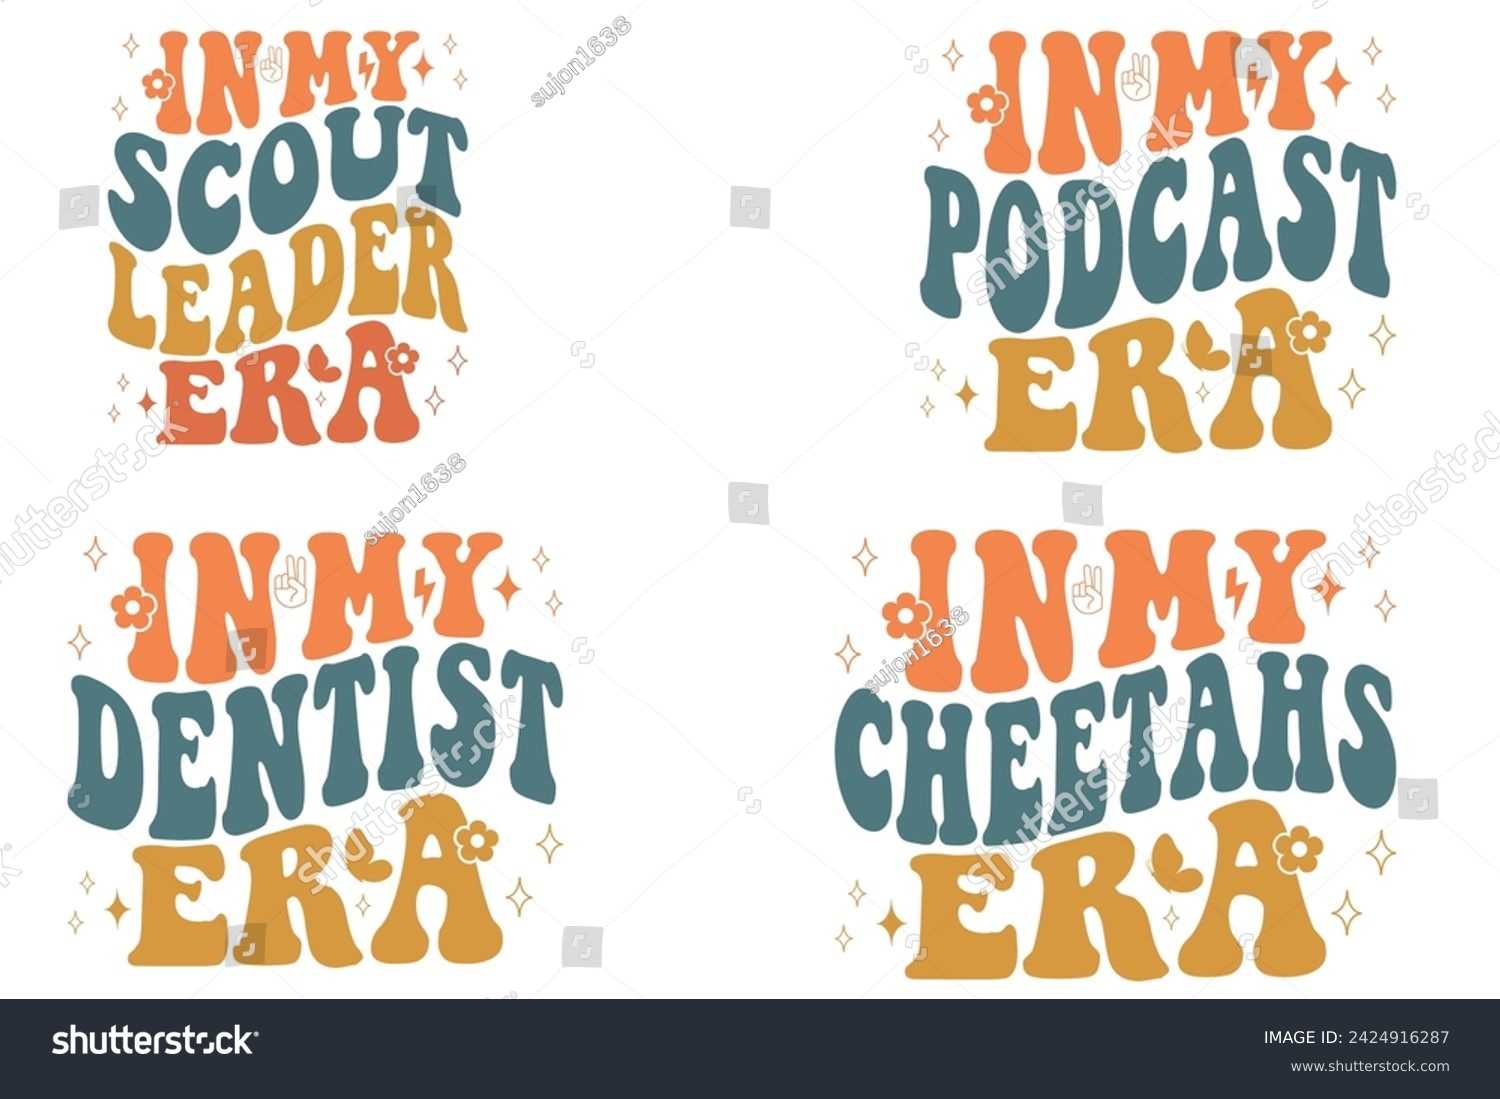 SVG of In My Scout Leader Era, In My Podcast Era, In My Dentist Era, In My Cheetahs Era retro T-shirt svg